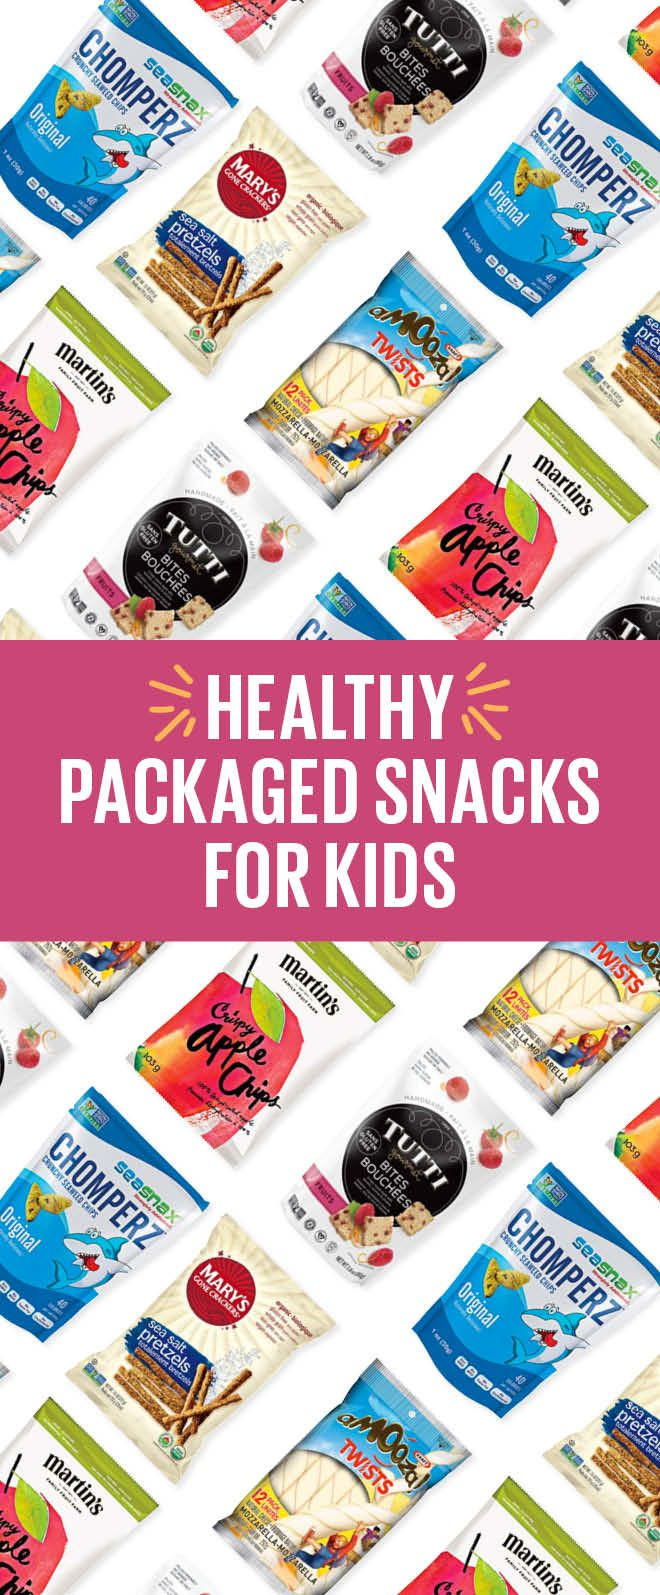 Healthy Packaged Snacks For Kids
 17 healthy packaged snacks for kids